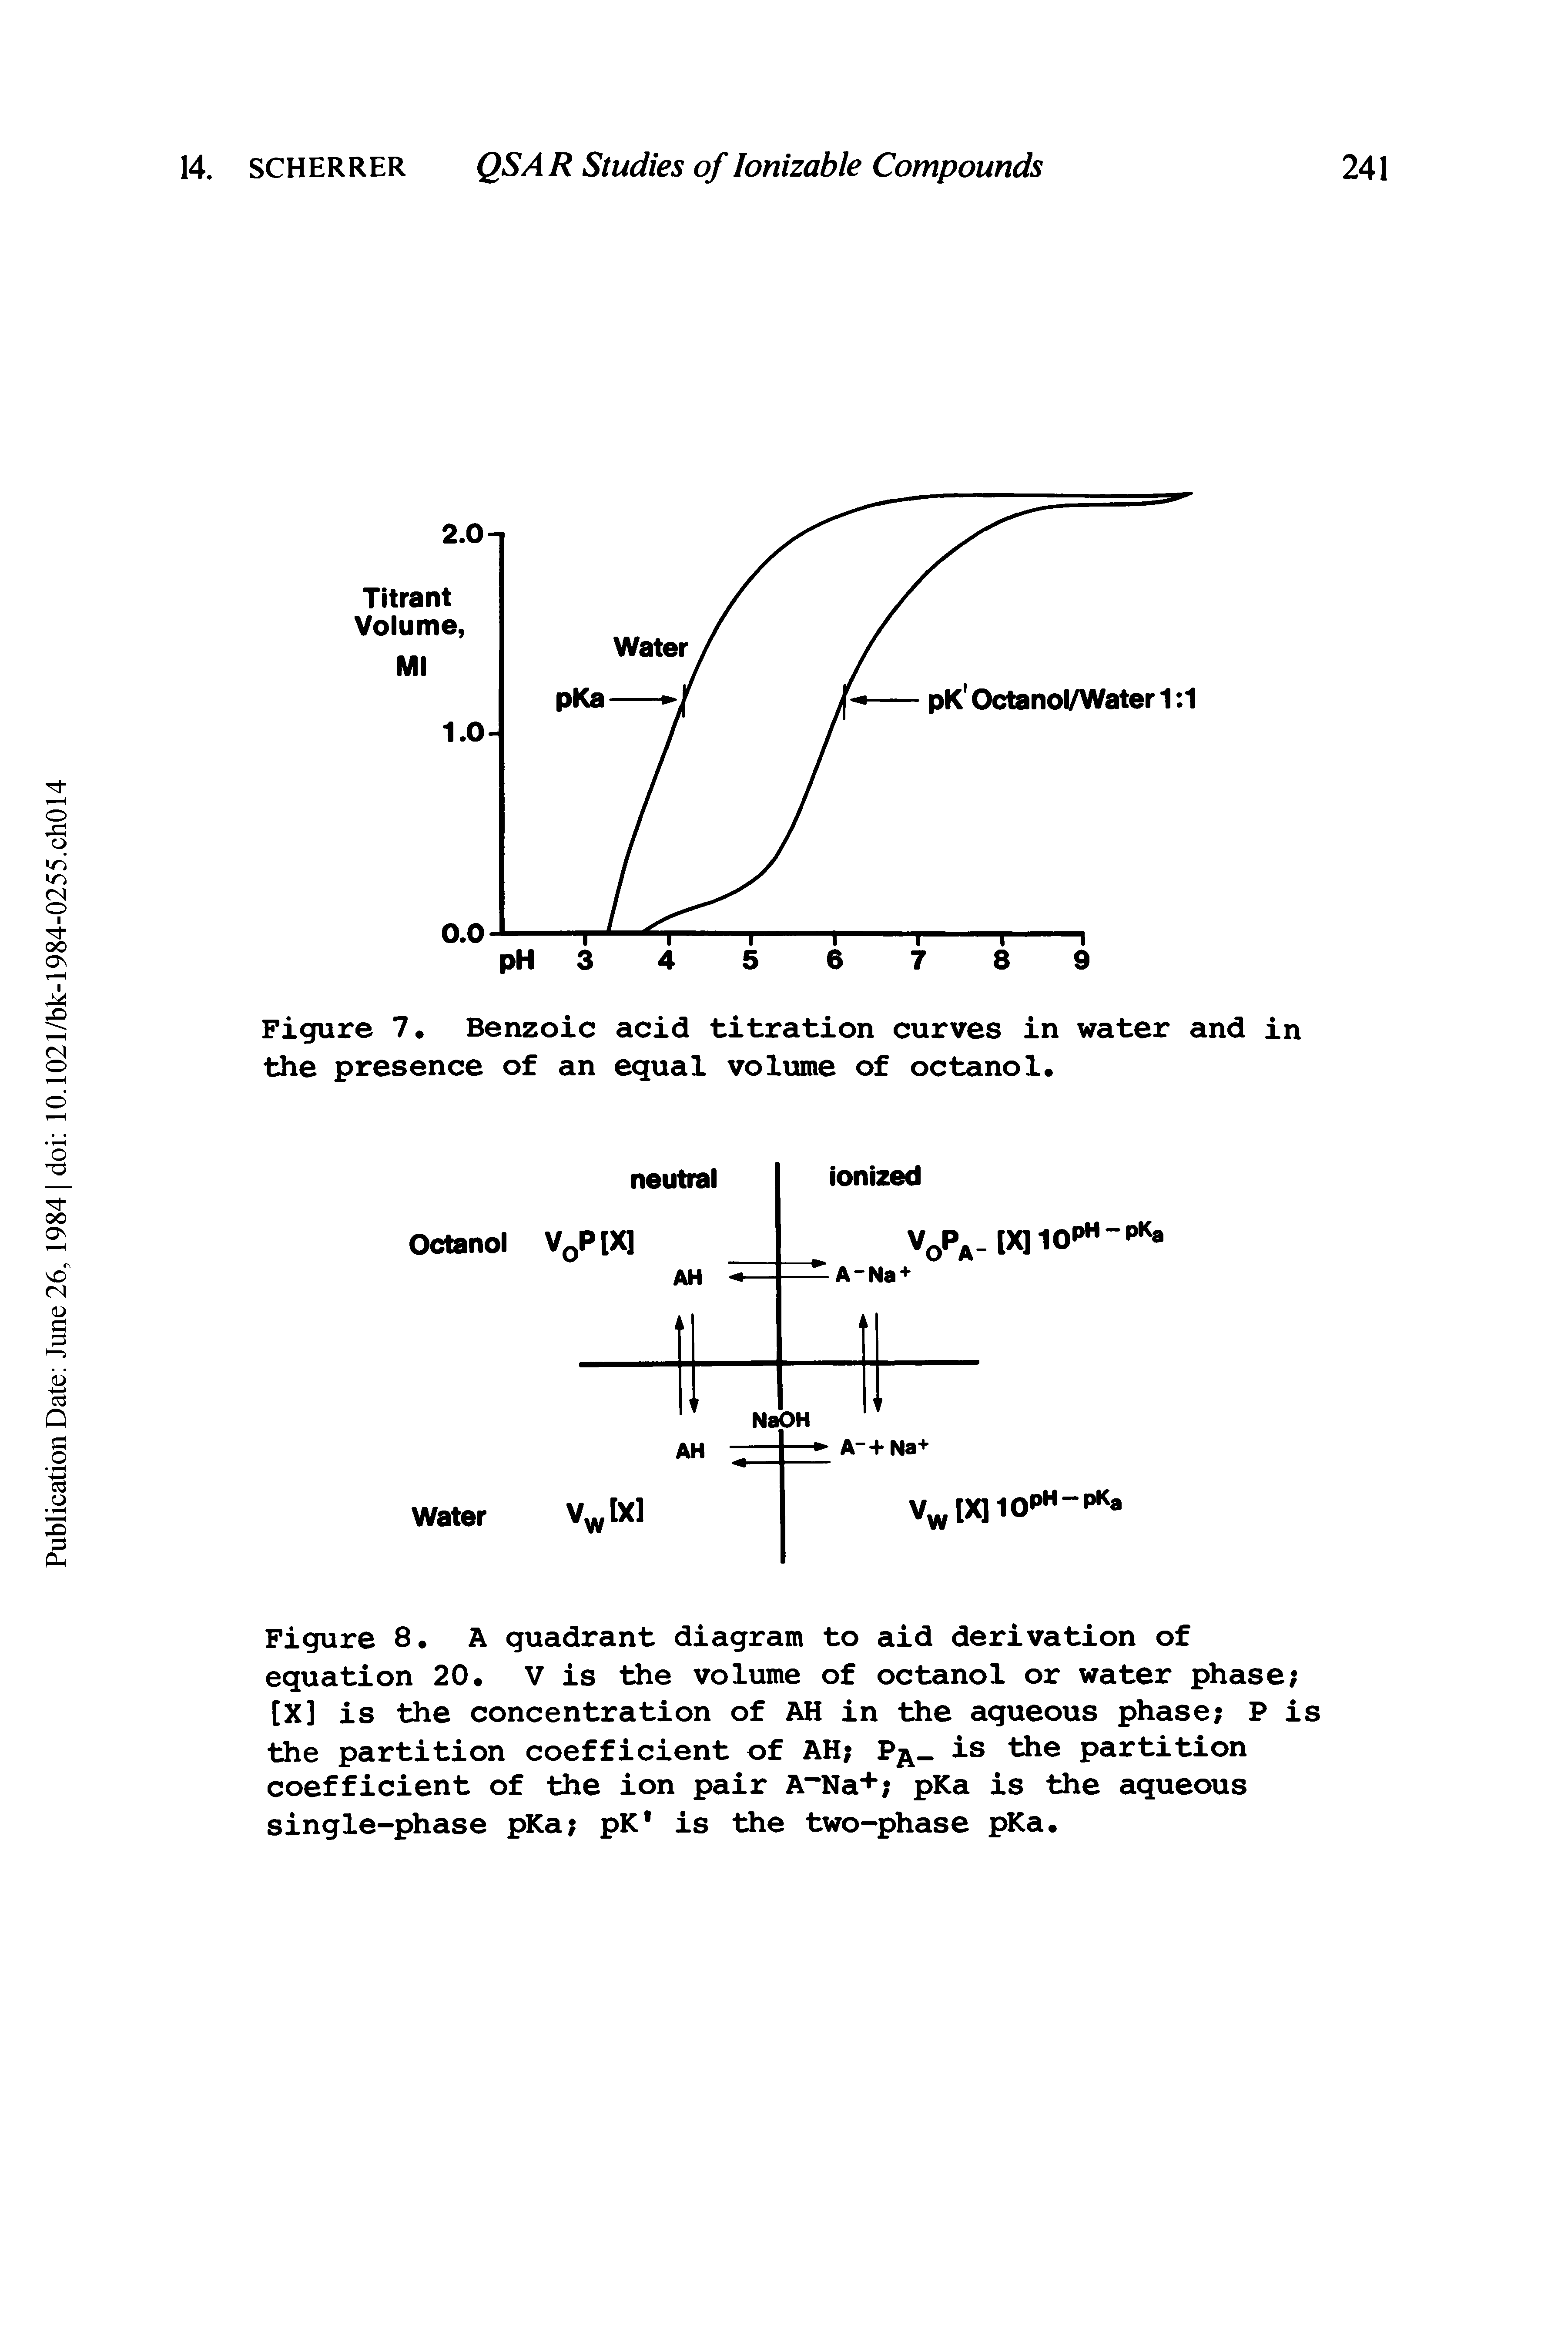 Figure 8. A quadrant diagram to aid derivation of equation 20. V is the volume of octanol or water phase [X] is the concentration of AH in the aqueous phase P is the partition coefficient of AH P is the partition coefficient of the ion pair A"Na+ pKa is the aqueous single-phase pKa pK is the two-phase pKa.